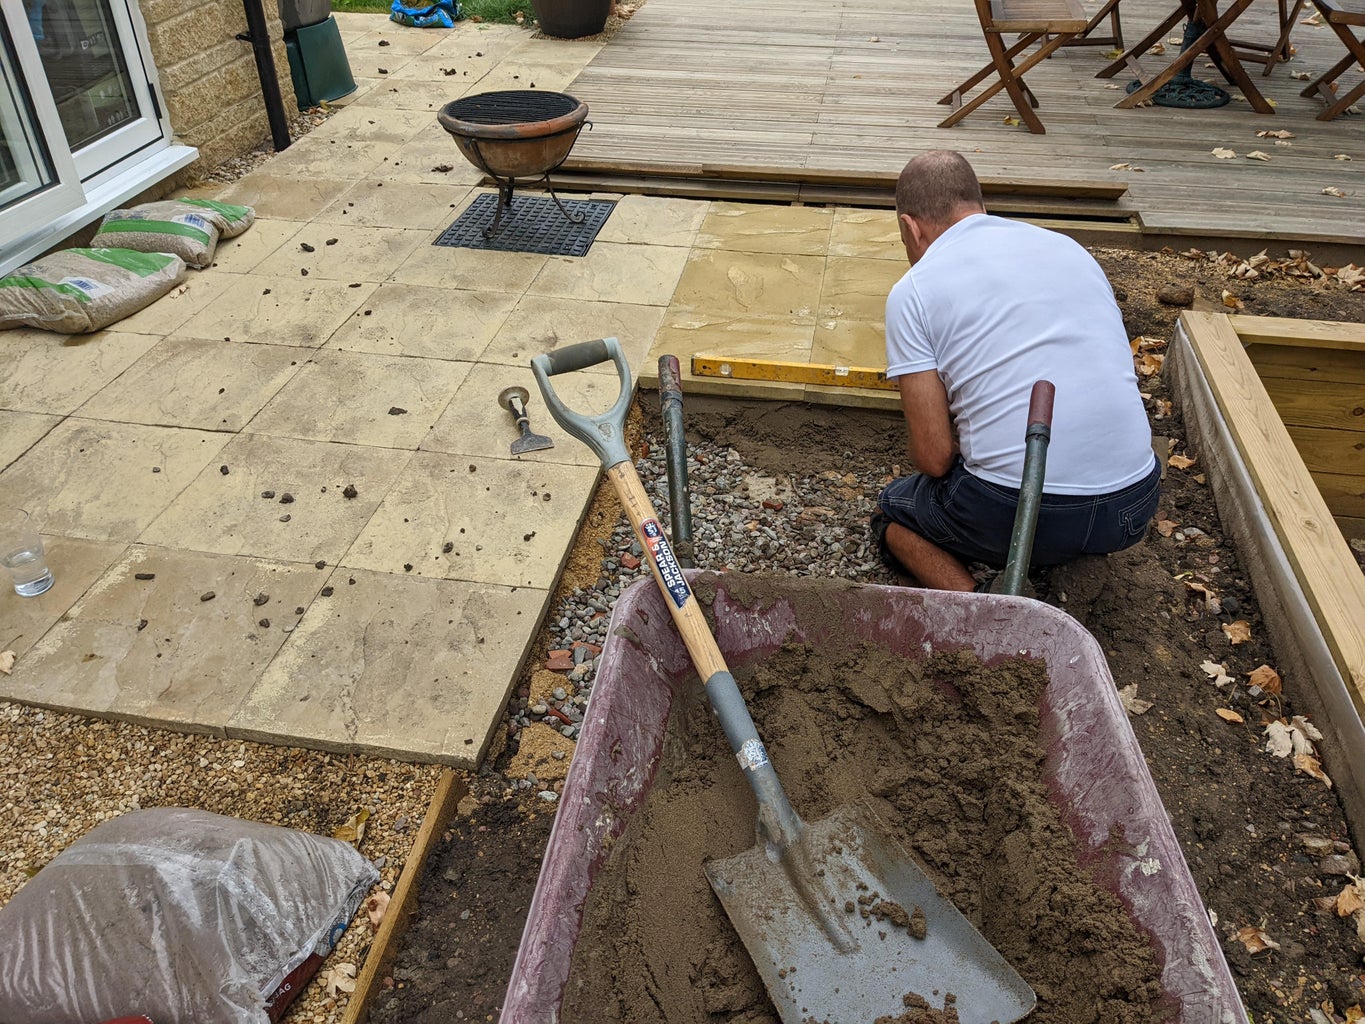 Patio Extension & Stepping Stones